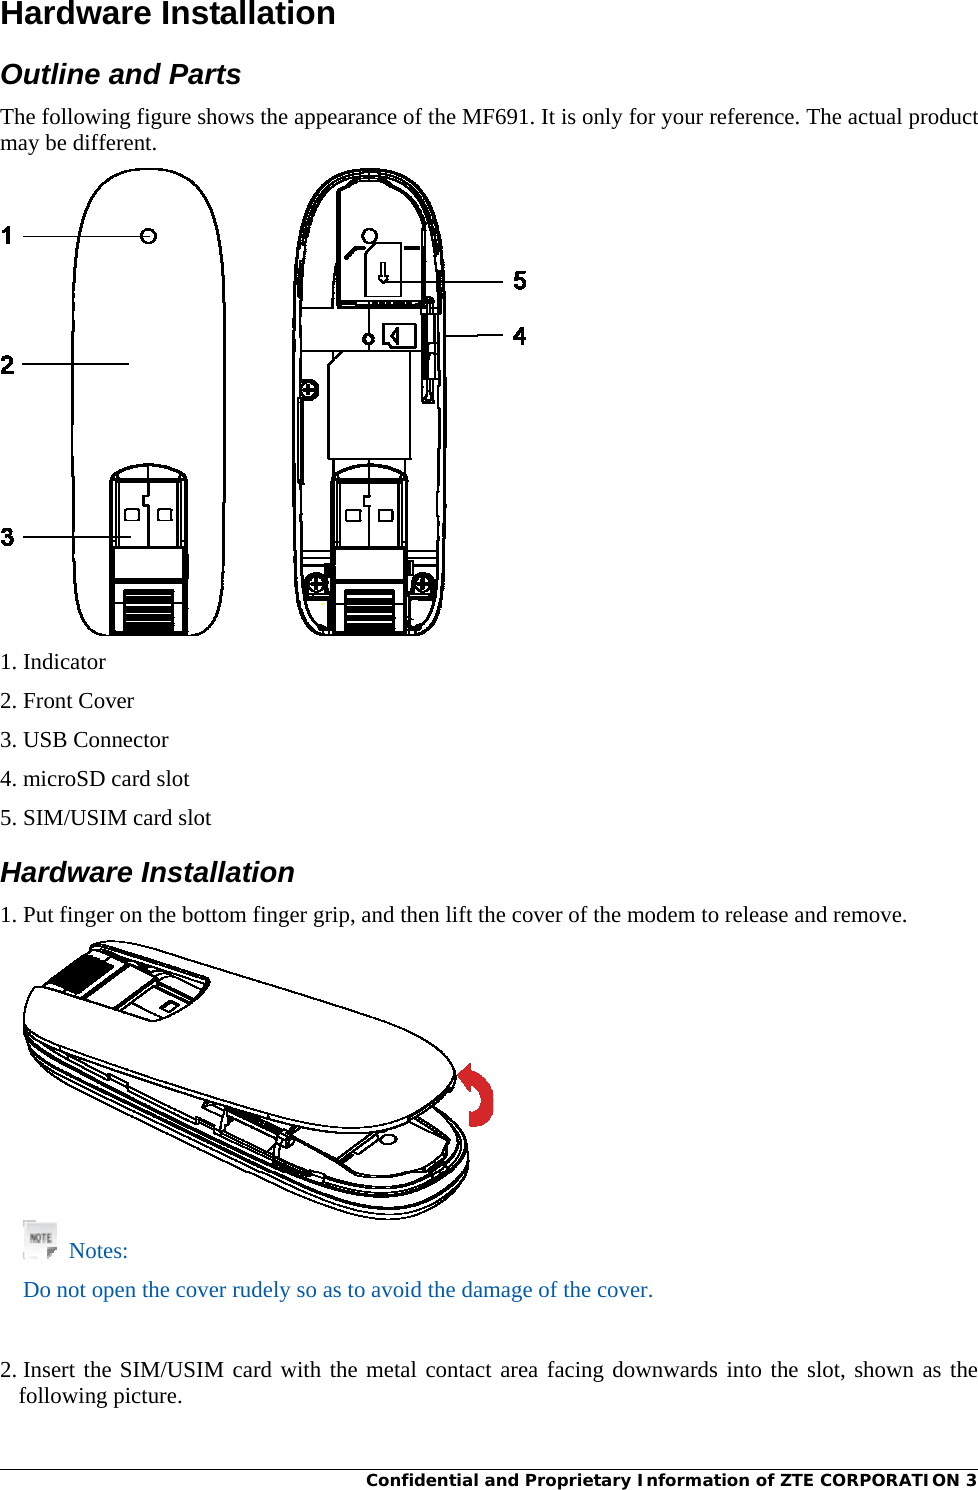 Confidential and Proprietary Information of ZTE CORPORATION 3Hardware Installation Outline and Parts The following figure shows the appearance of the MF691. It is only for your reference. The actual product may be different.  1. Indicator 2. Front Cover 3. USB Connector 4. microSD card slot 5. SIM/USIM card slot Hardware Installation 1. Put finger on the bottom finger grip, and then lift the cover of the modem to release and remove.   Notes: Do not open the cover rudely so as to avoid the damage of the cover.     2. Insert the SIM/USIM card with the metal contact area facing downwards into the slot, shown as the following picture. 